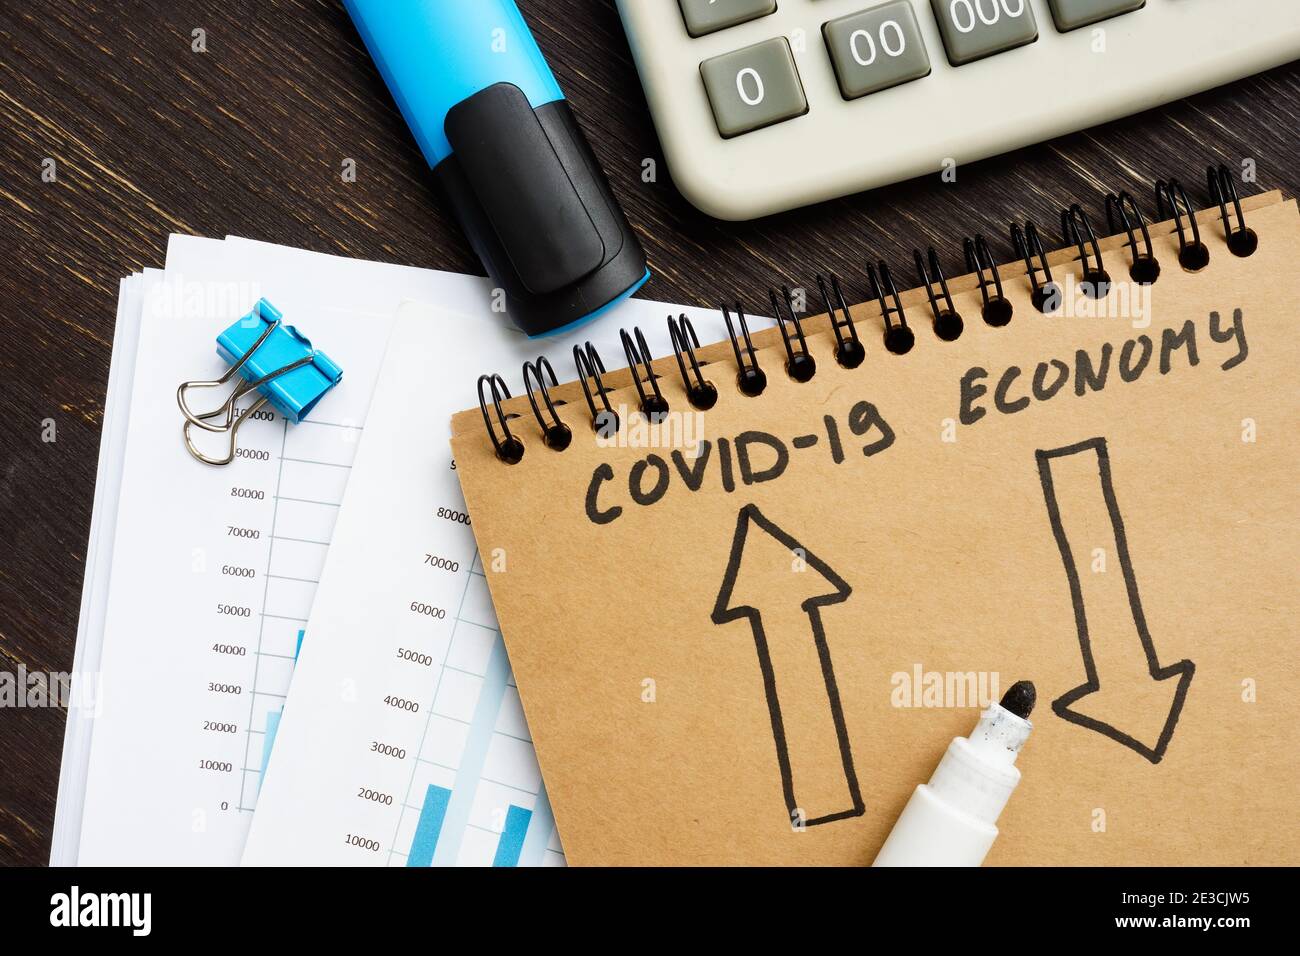 Covid-19 and economy crisis concept. Arrows on the page. Stock Photo